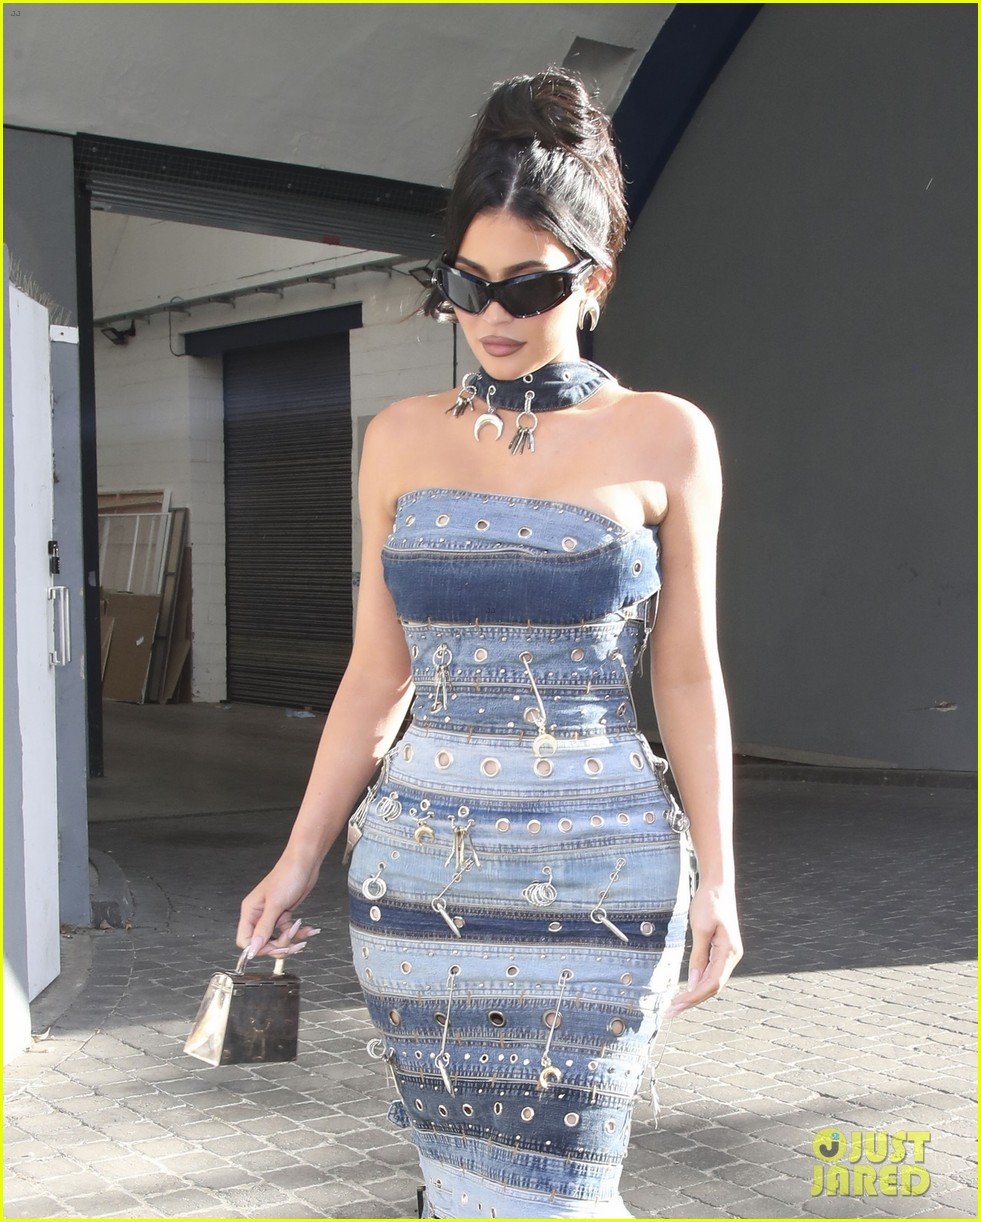 Kylie Jenner Rocks All Denim While Working in London | Photo 1353679 ...